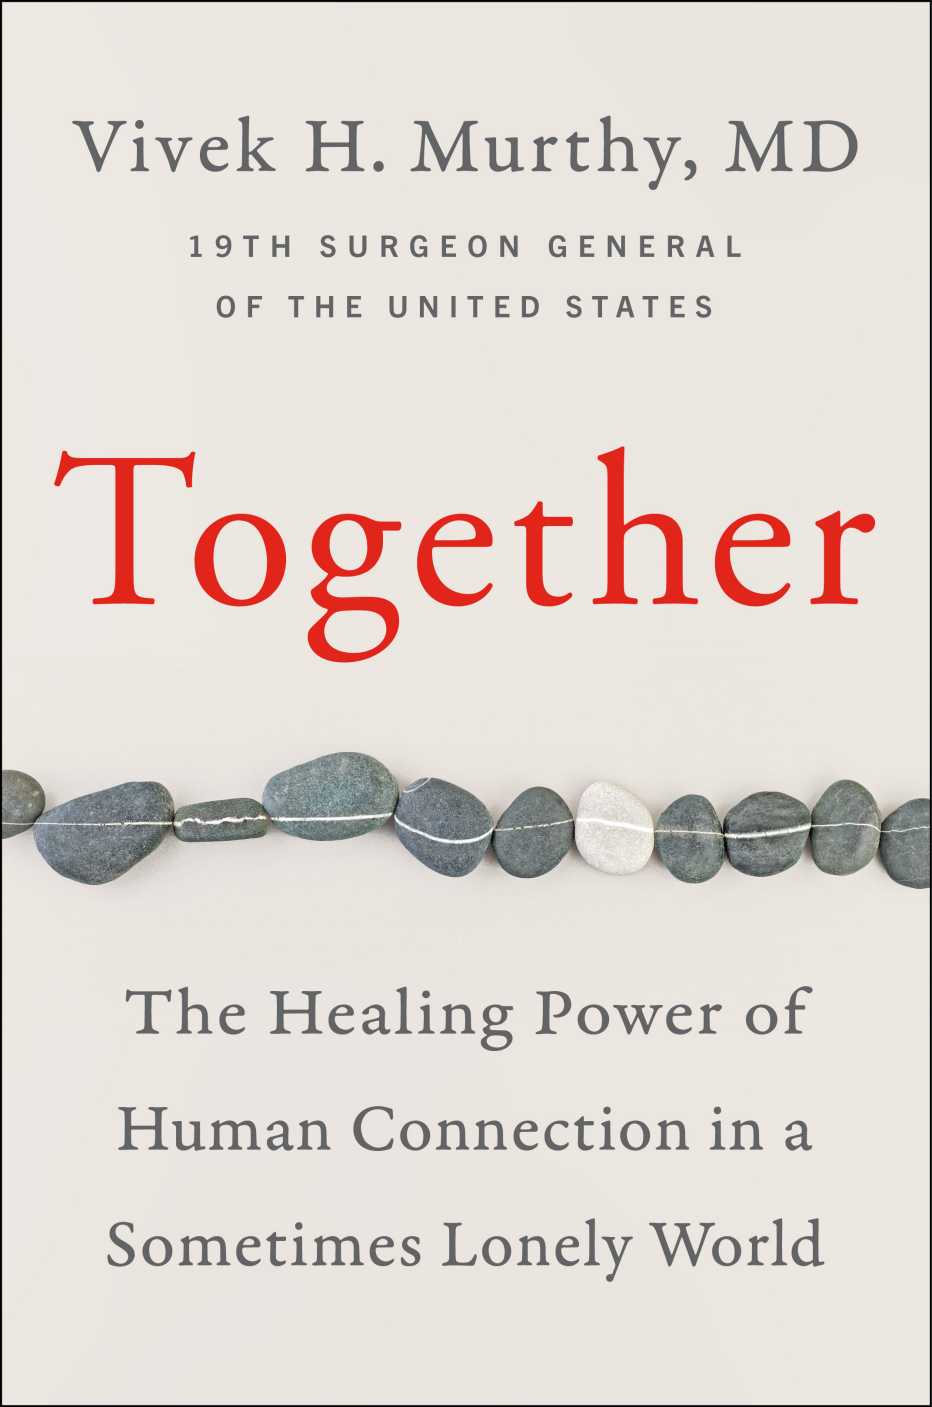 cover of book by vivek h. murthy, md titled together